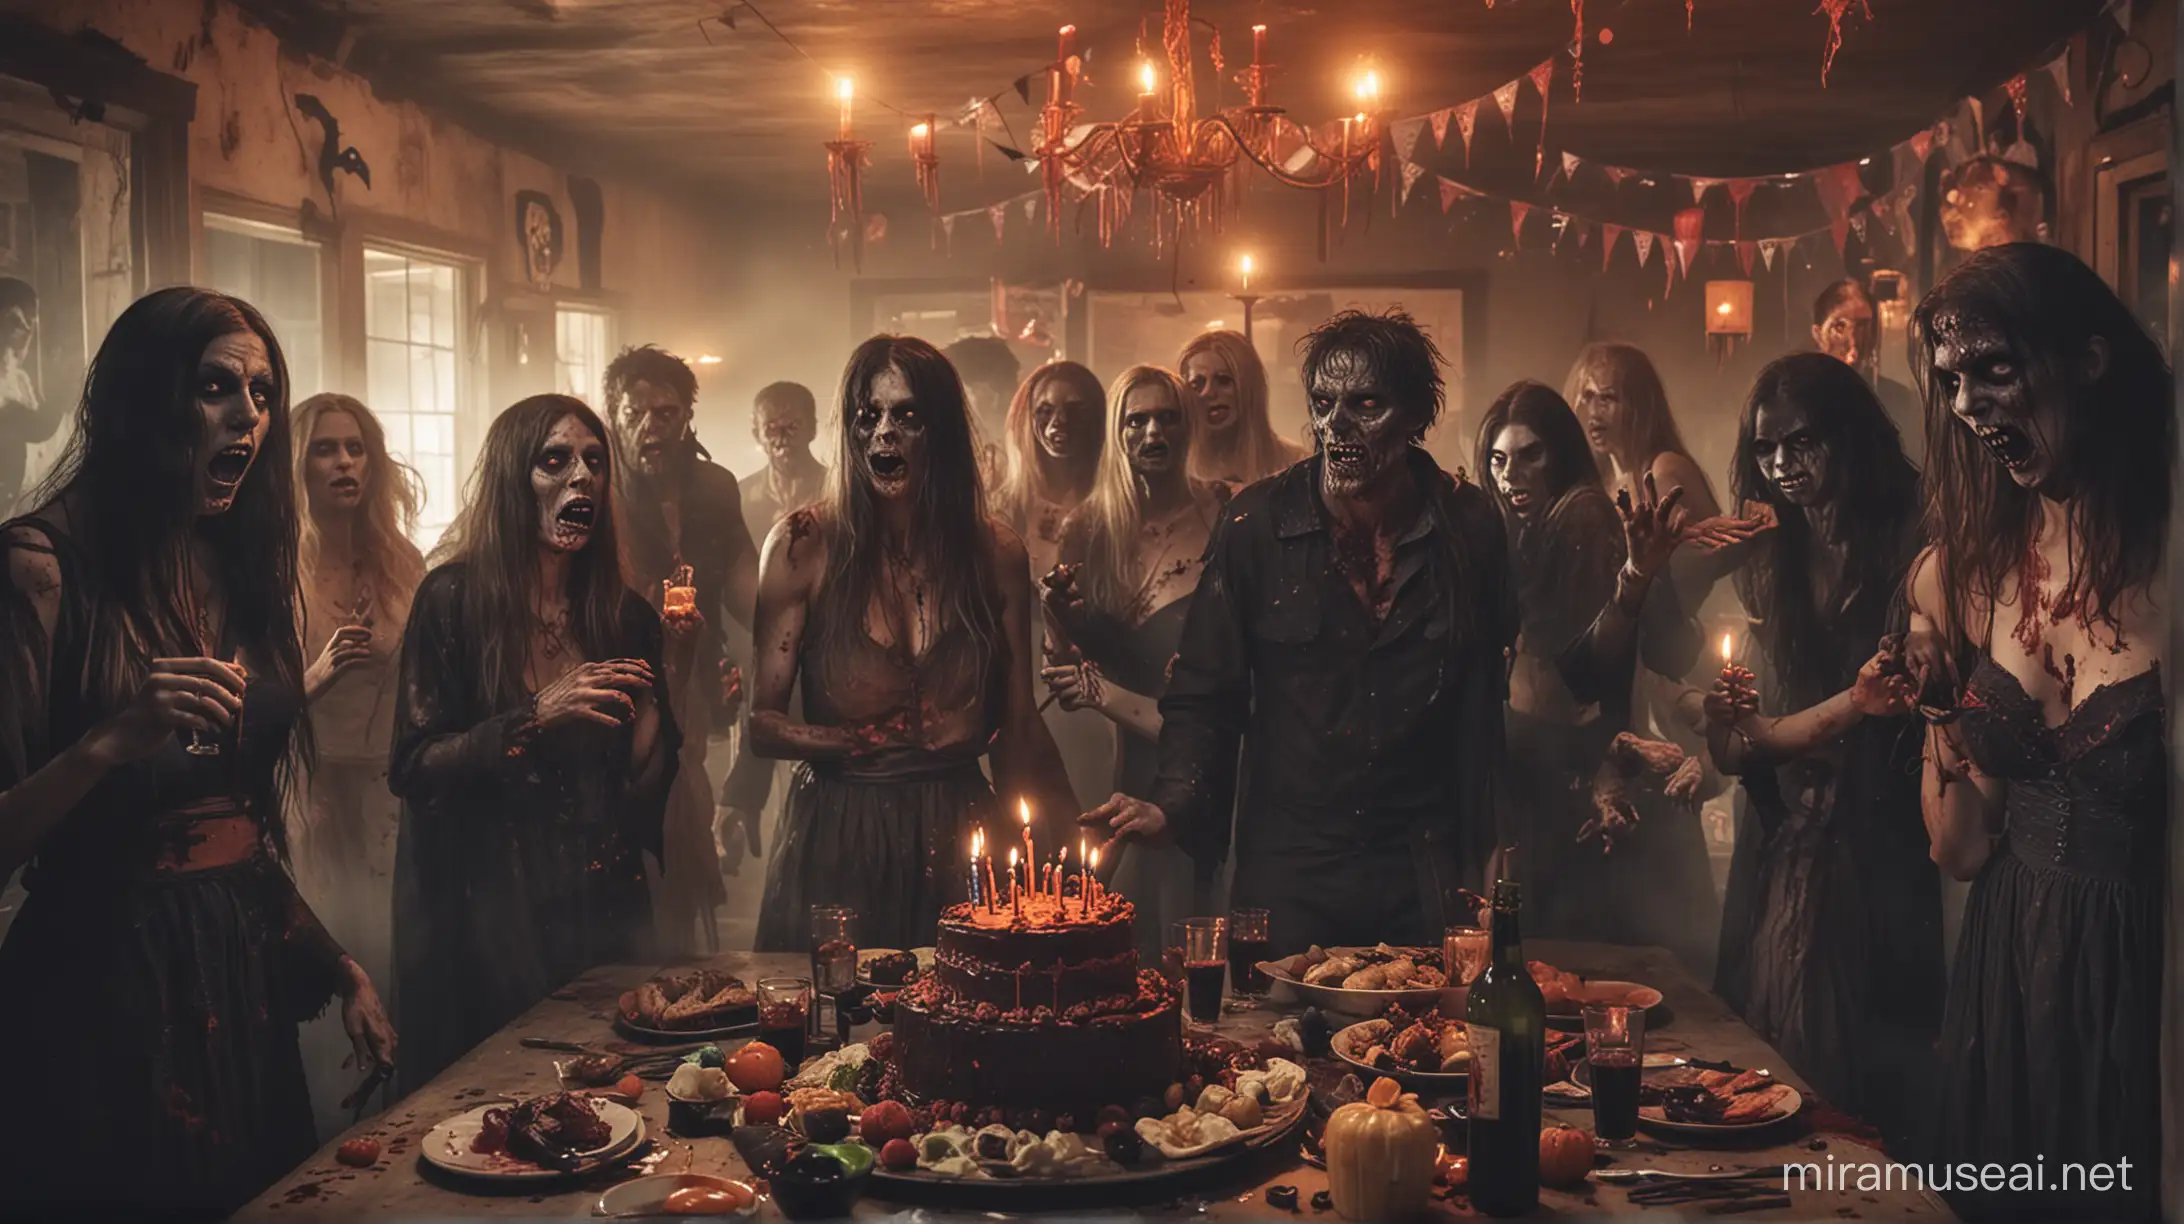 Spooky Halloween Birthday Bash with Zombies and Demons